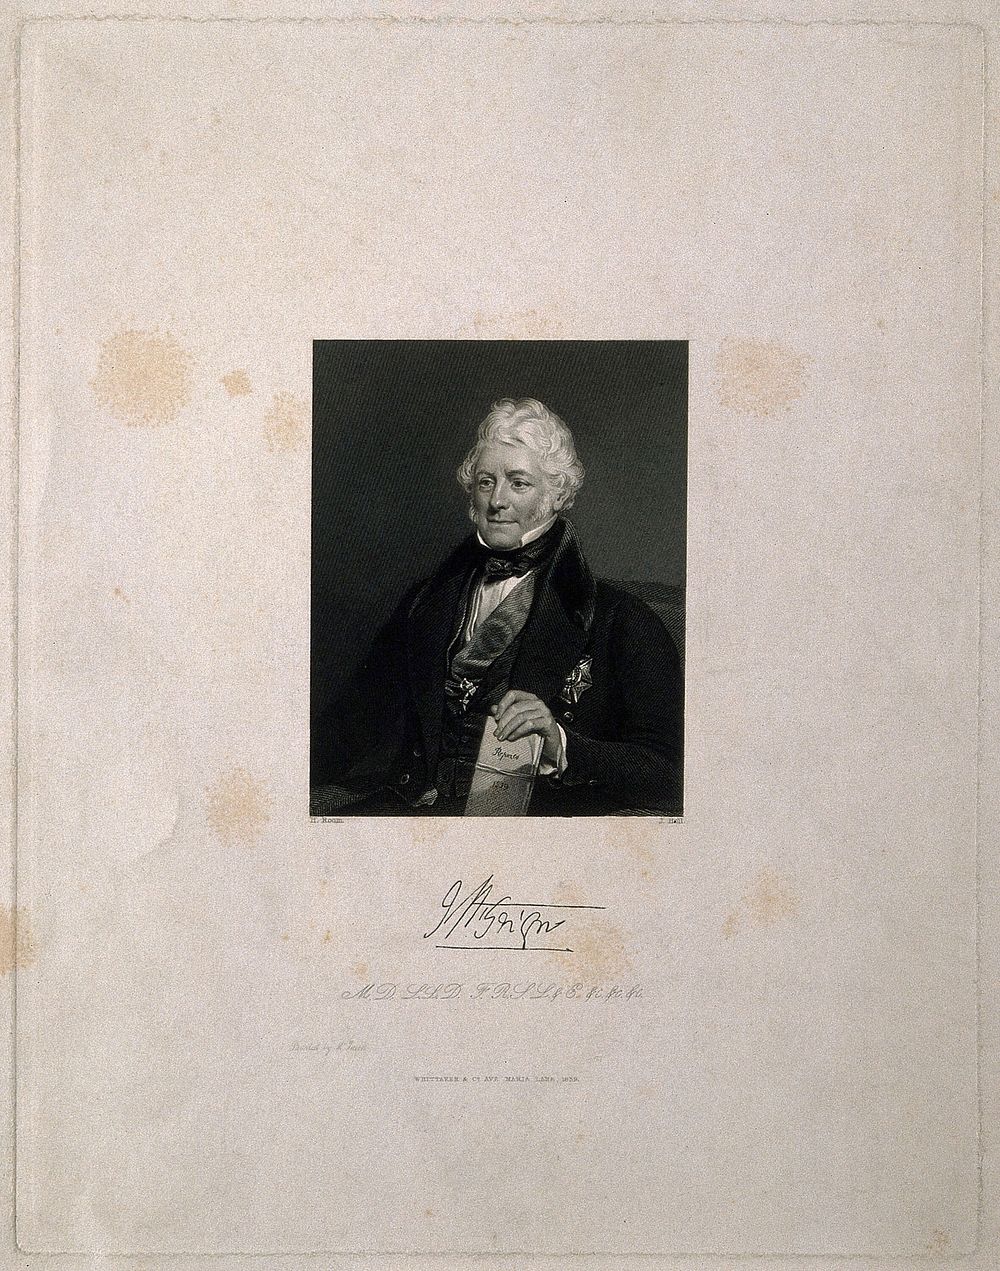 Sir James McGrigor. Stipple engraving by J. Holl, 1839, after H. Room.